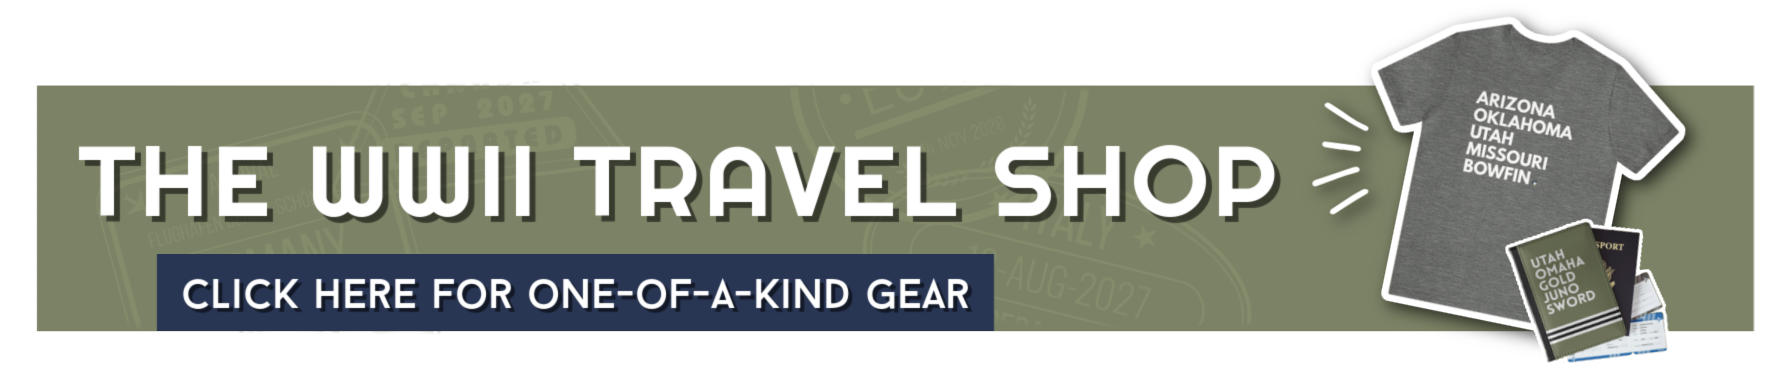 ad banner for the wwii travel shop